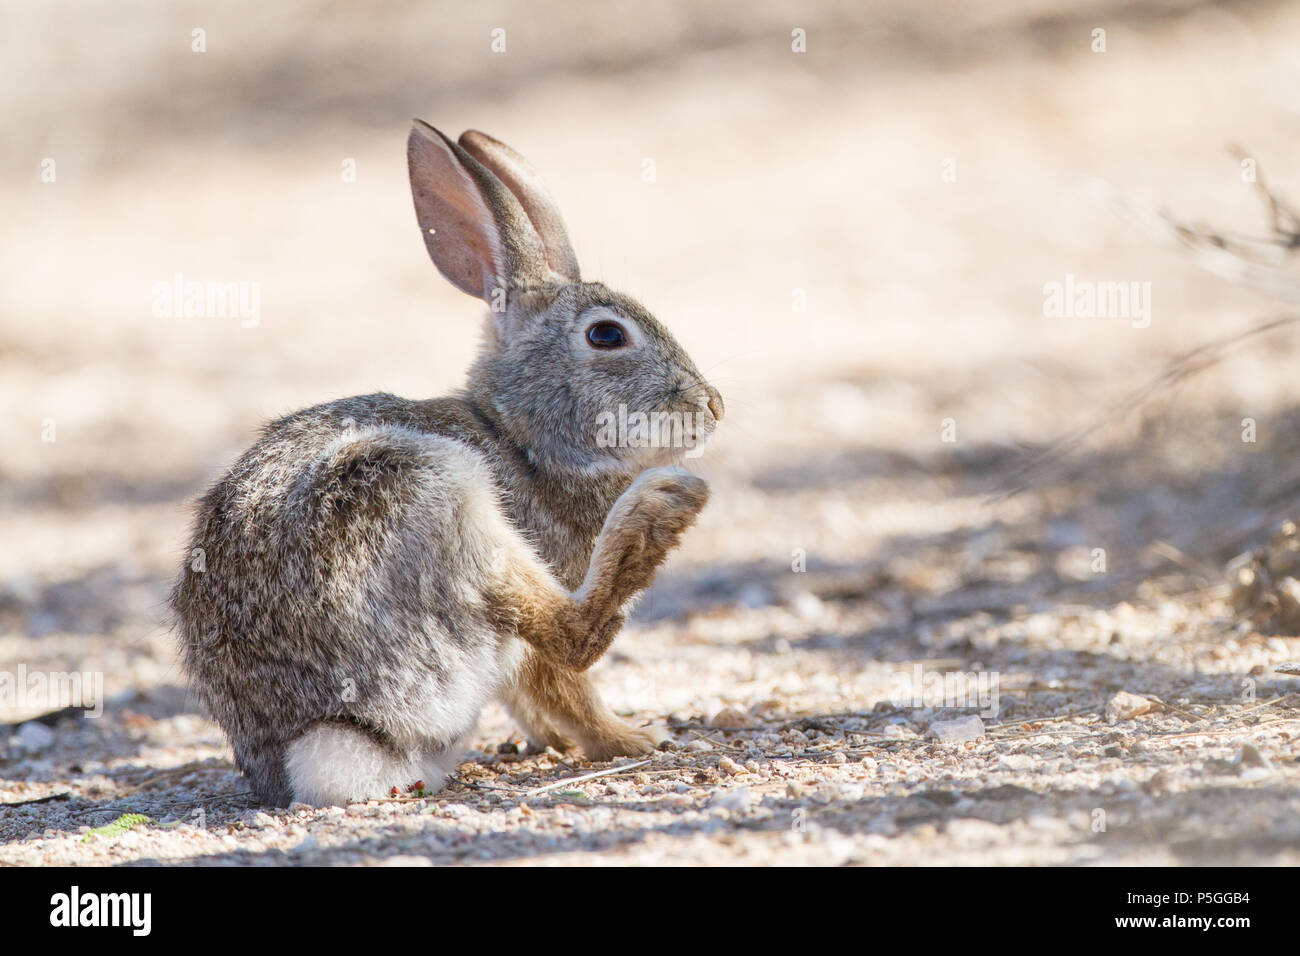 A desert cottontail scratching its chin in the Sonoran Desert of Arizona, USA. Stock Photo